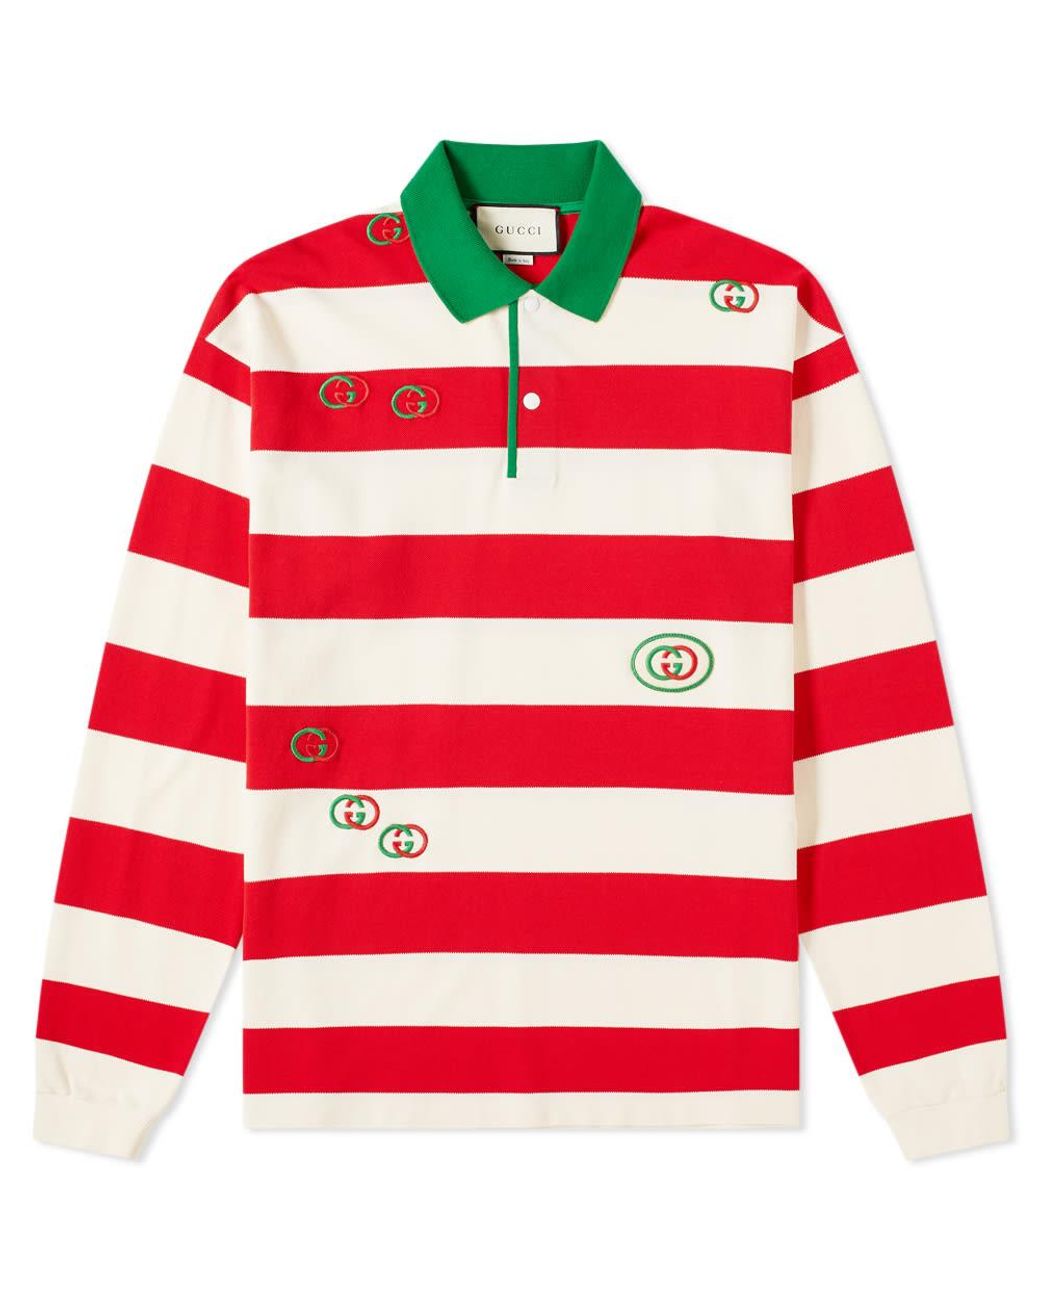 Gucci Long Sleeve Striped Logo Tee in Red for Men - Lyst